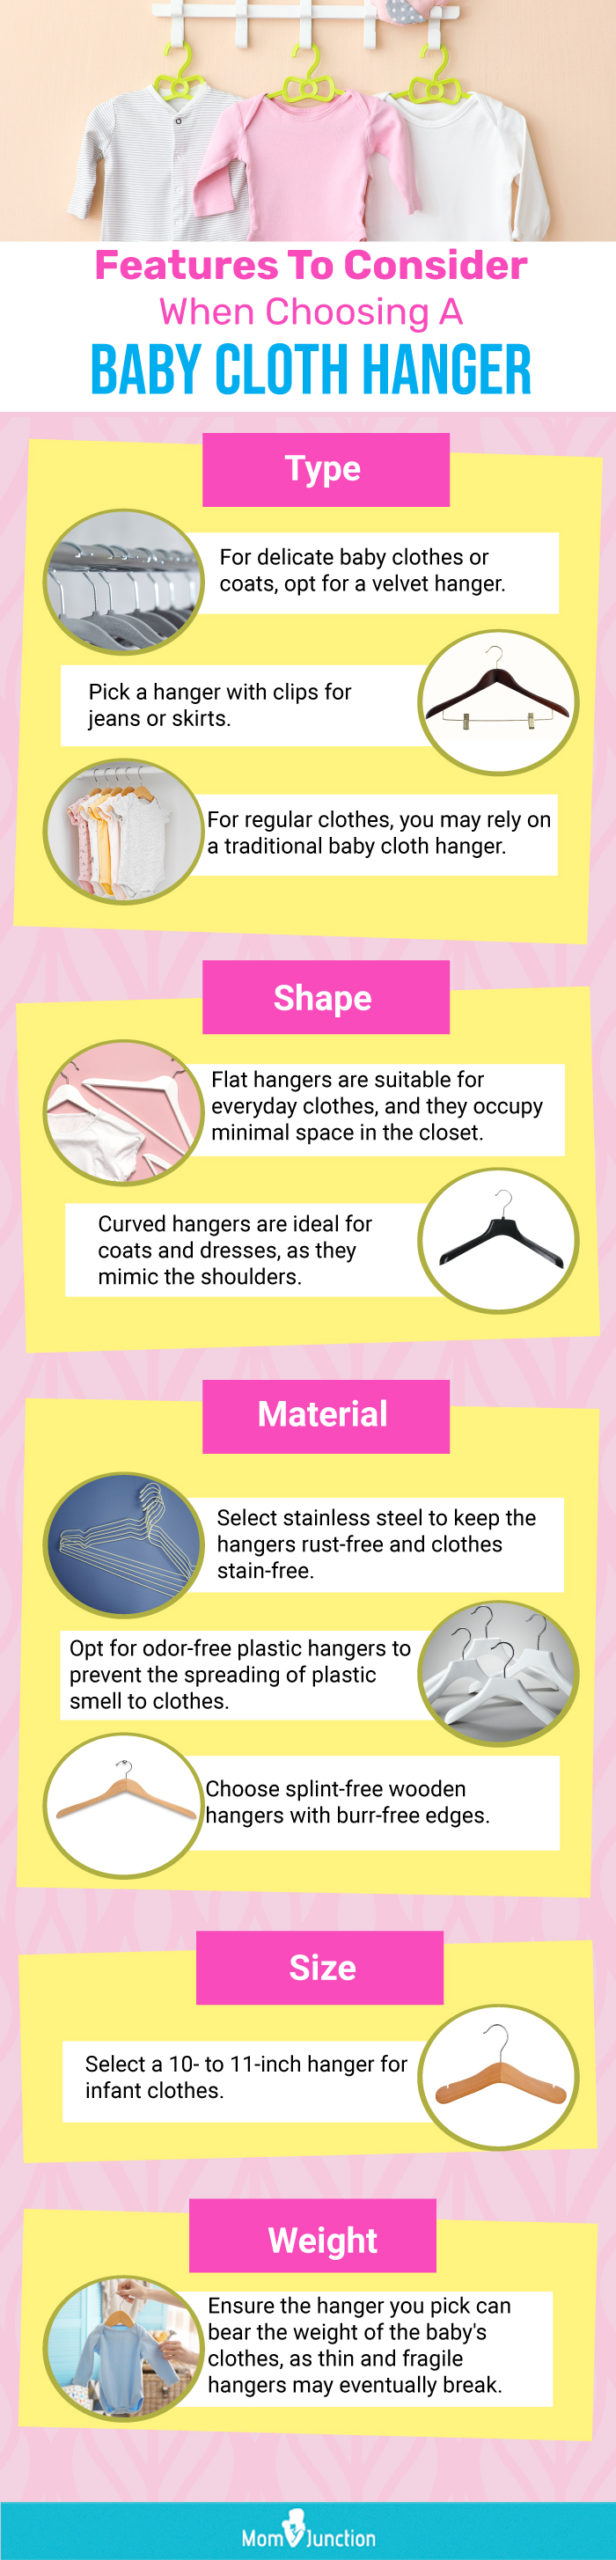 https://www.momjunction.com/wp-content/uploads/2023/02/Features-To-Consider-When-Choosing-A-Baby-Cloth-Hanger-scaled.jpg